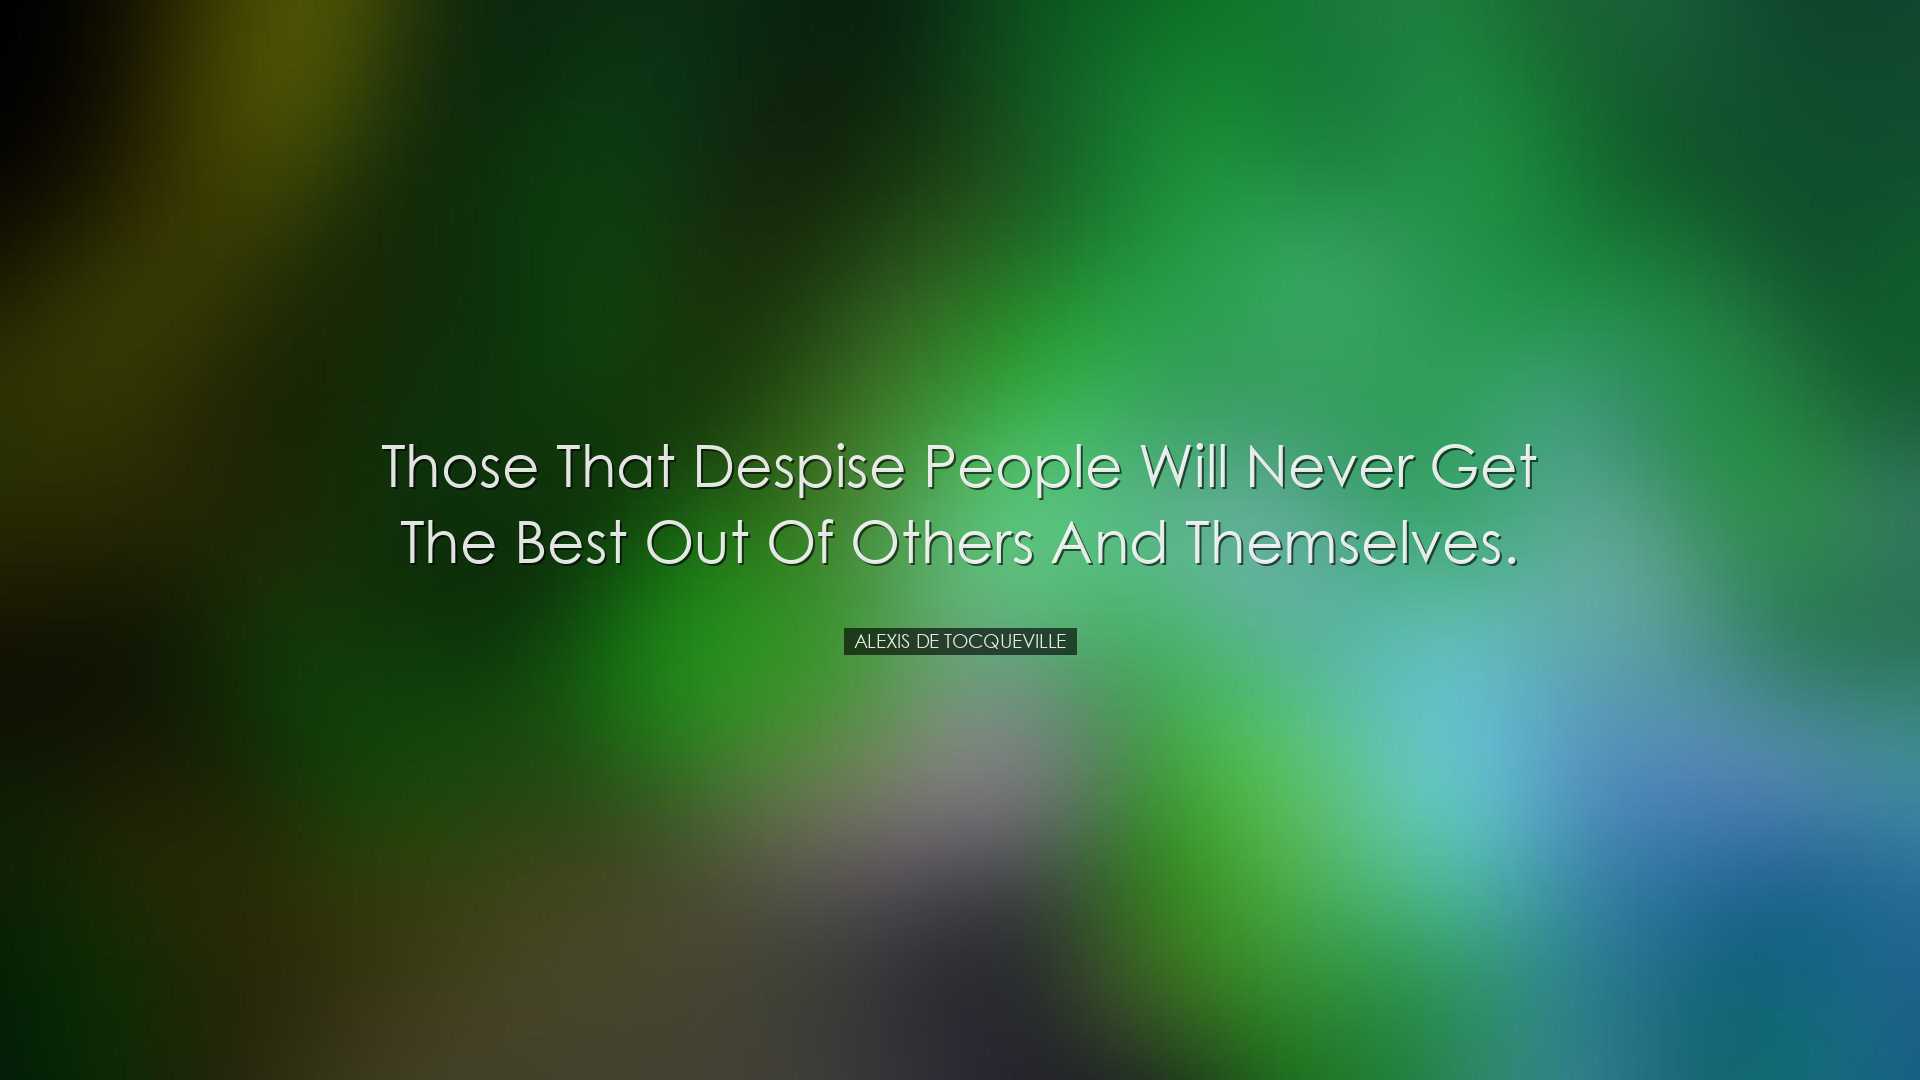 Those that despise people will never get the best out of others an